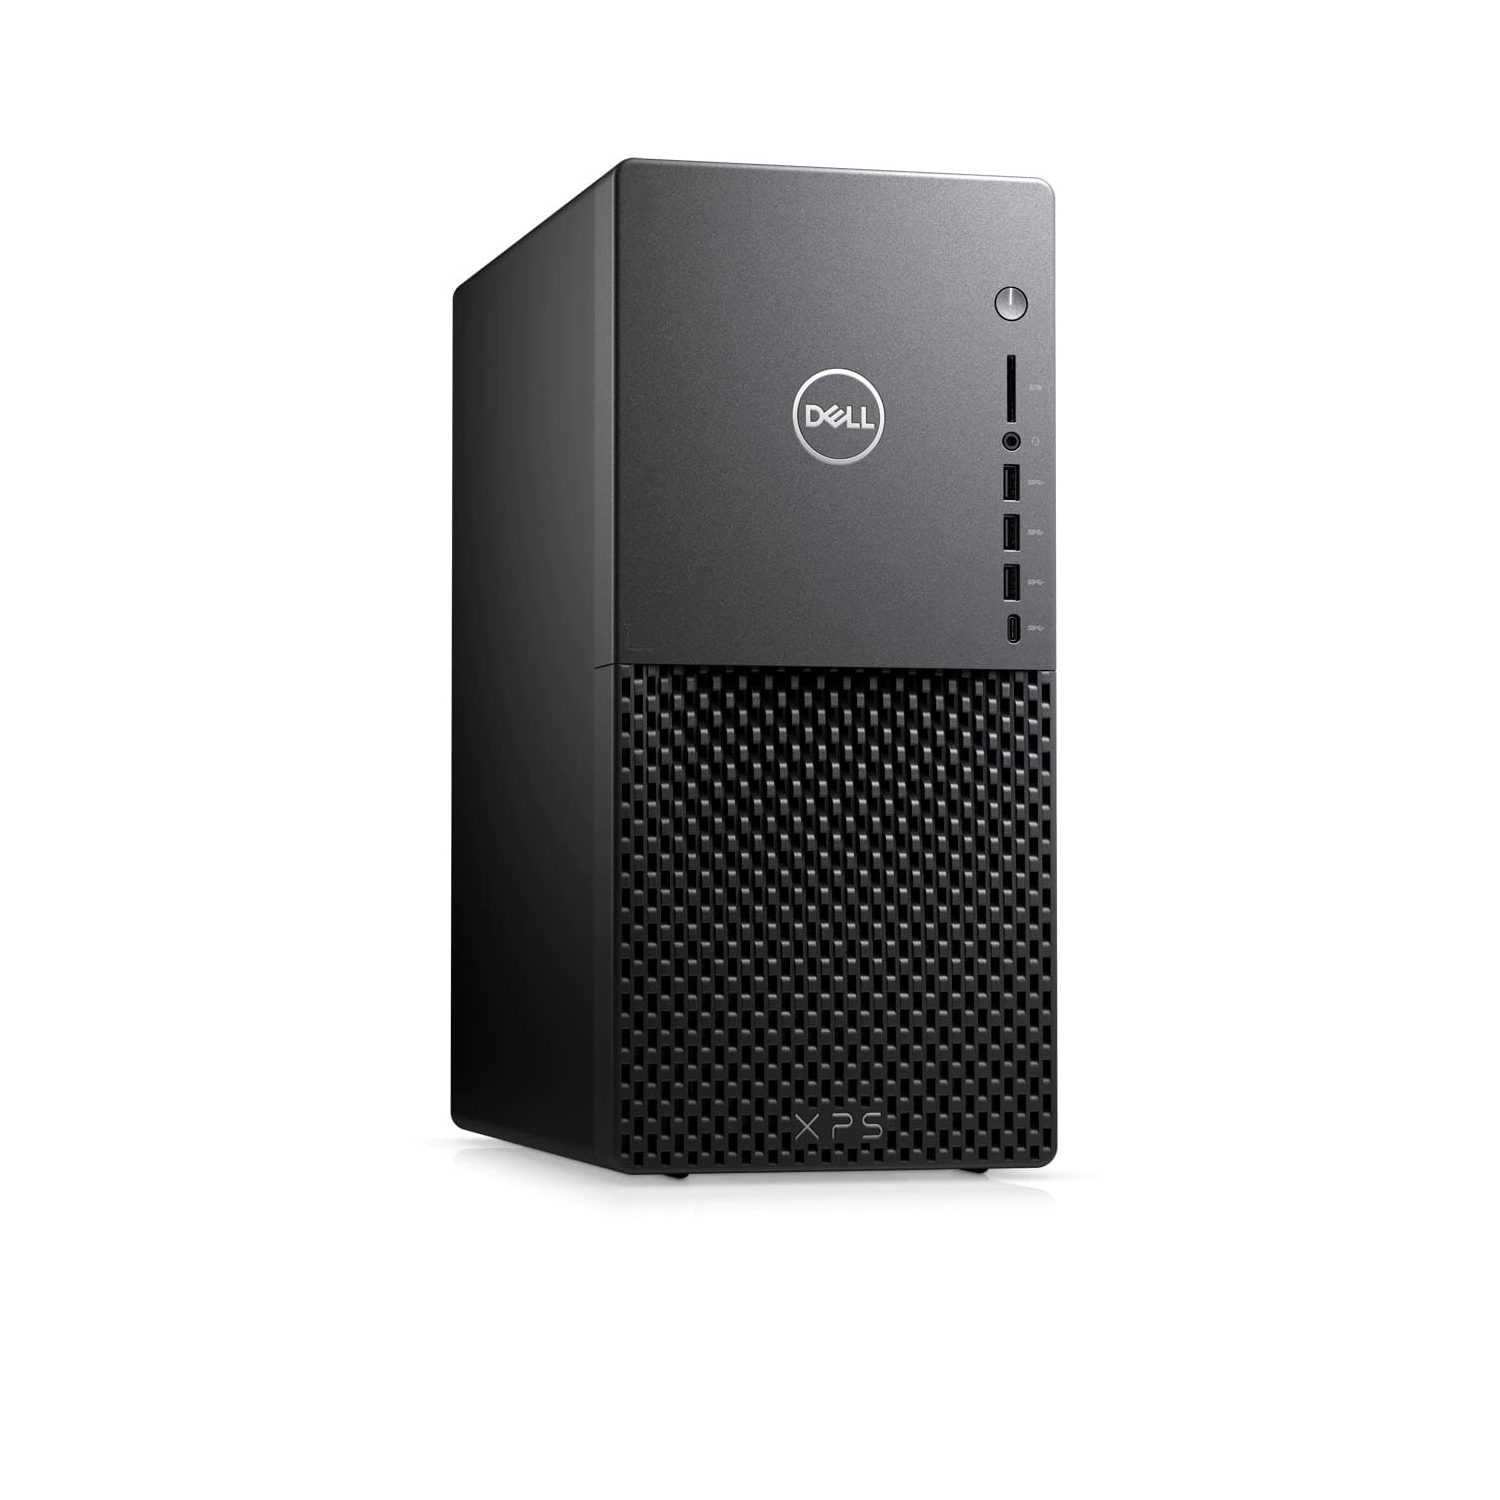 Refurbished (Excellent) - Dell XPS 8940 Desktop (2020) | Core i7 - 1TB HDD + 512GB SSD - 8GB RAM - 1660 Ti | 8 Cores @ 4.8 GHz - 10th Gen CPU Certified Refurbished